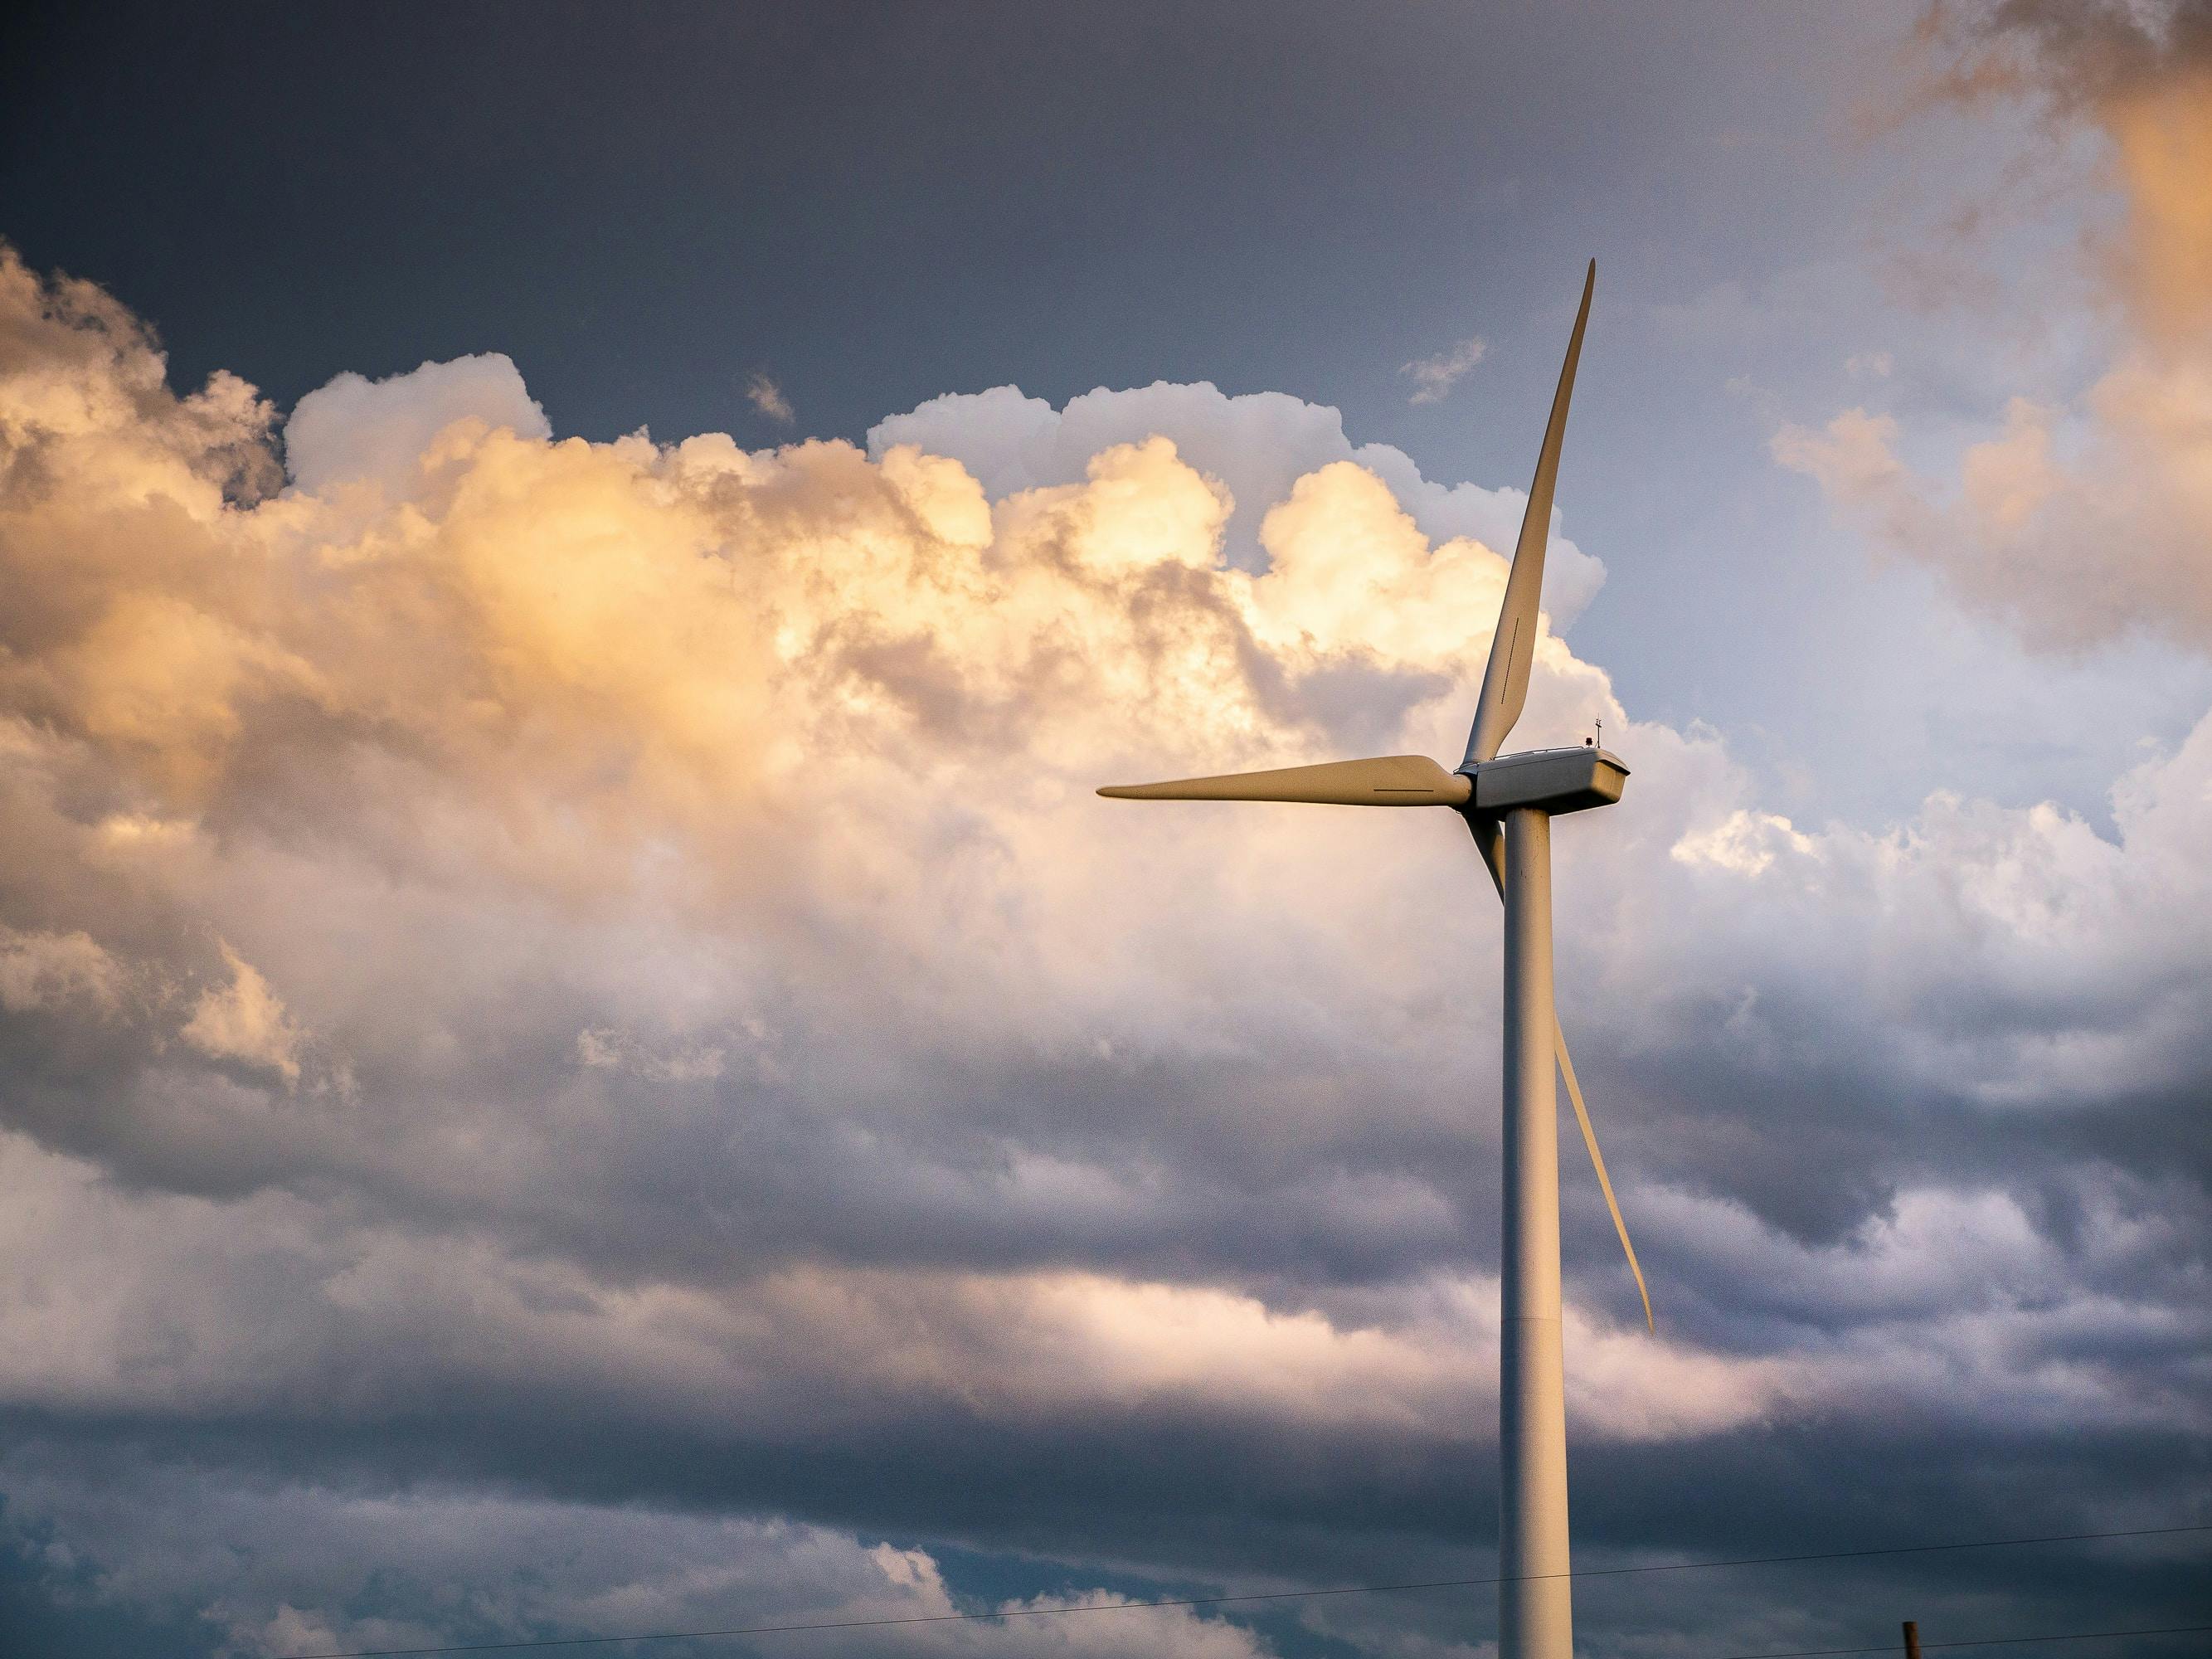 The photo depicts a wind turbine set against a stormy Oklahoma sky.